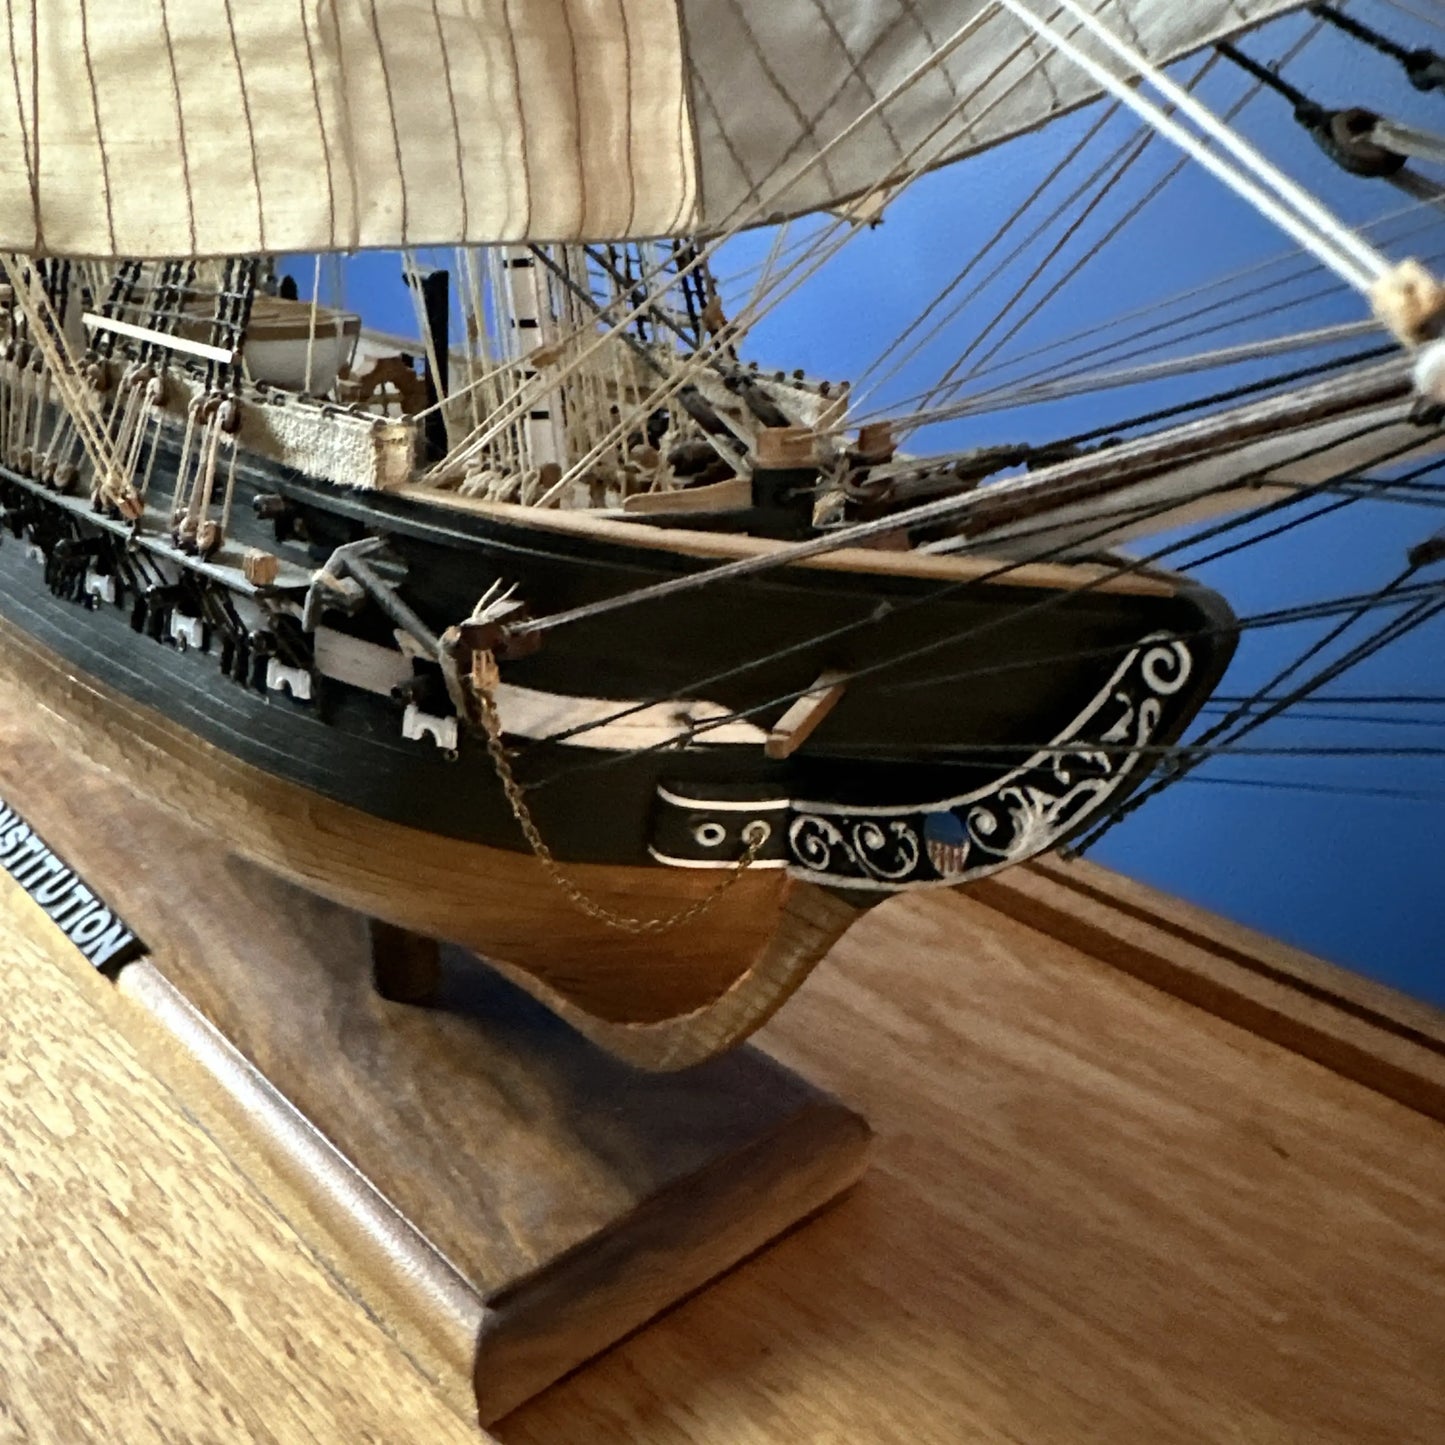 USS Constitution Models—Enclosed in glass with a custom built display table